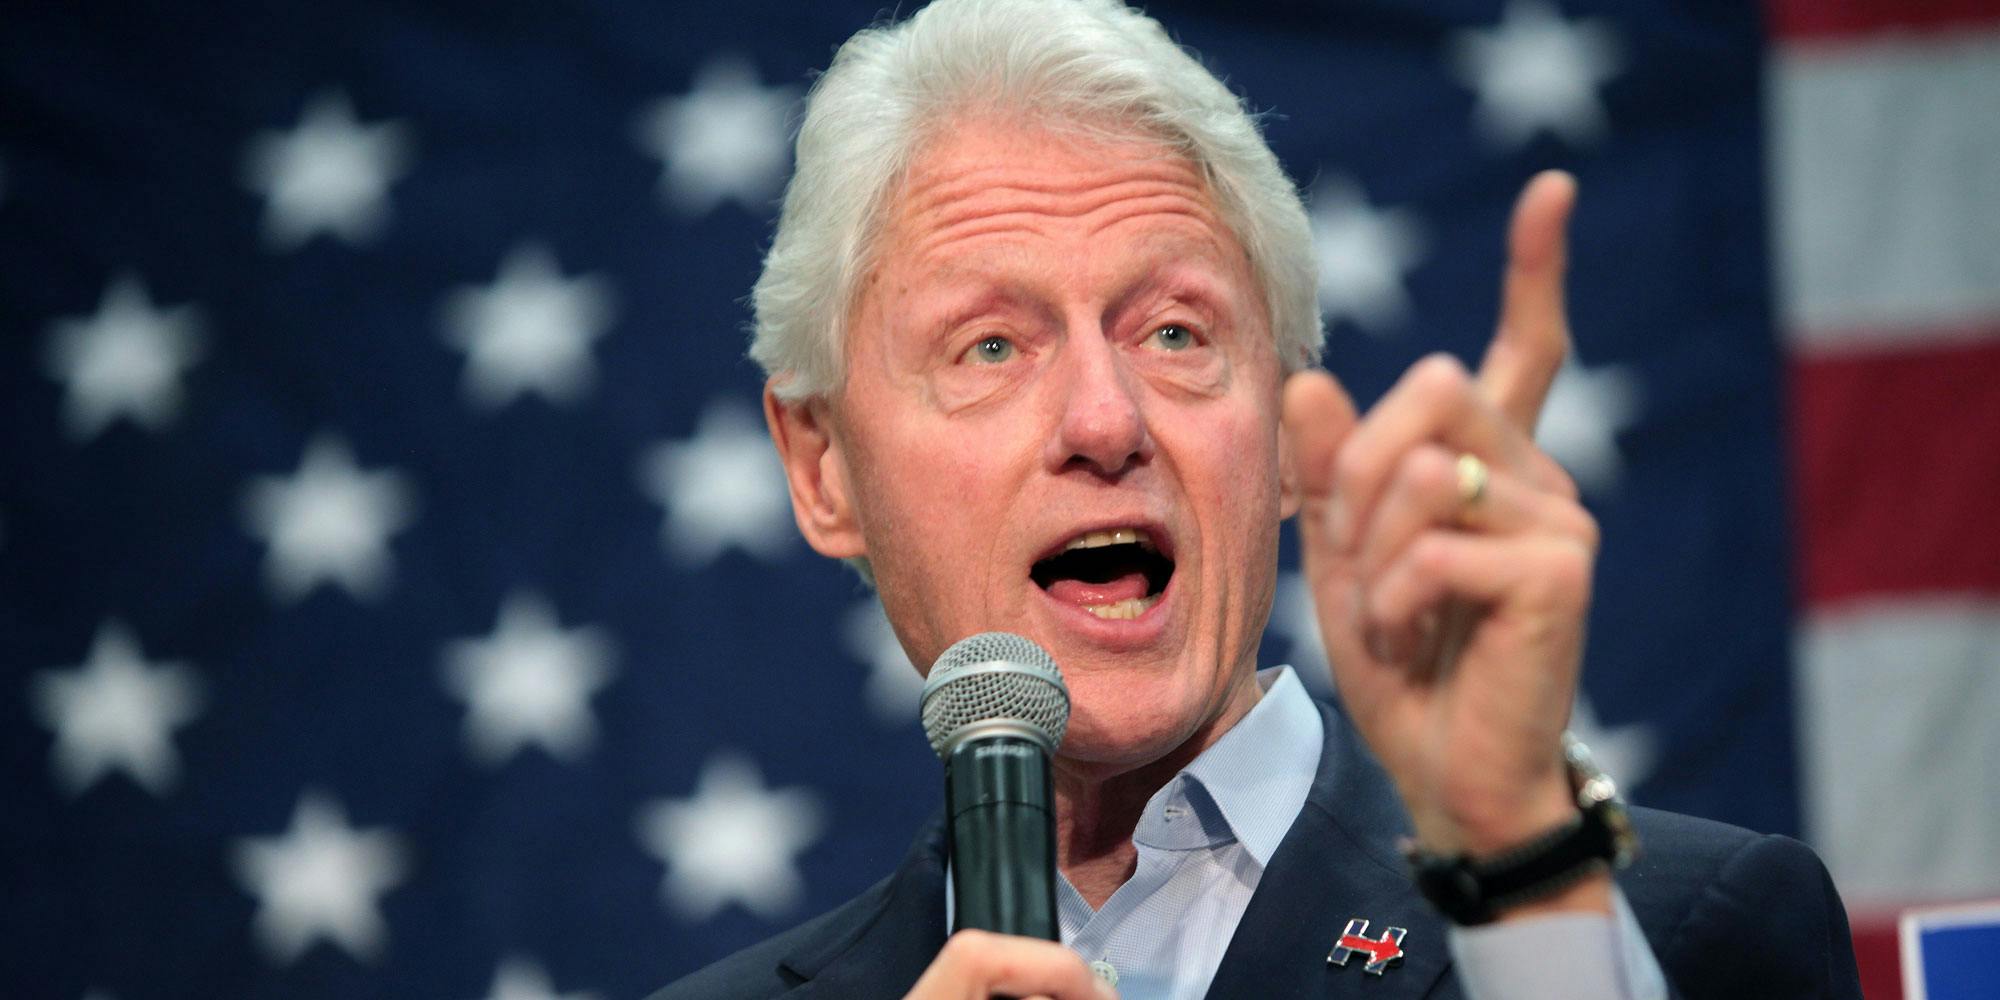 Bill Clinton pointing his finger in front of the American flag